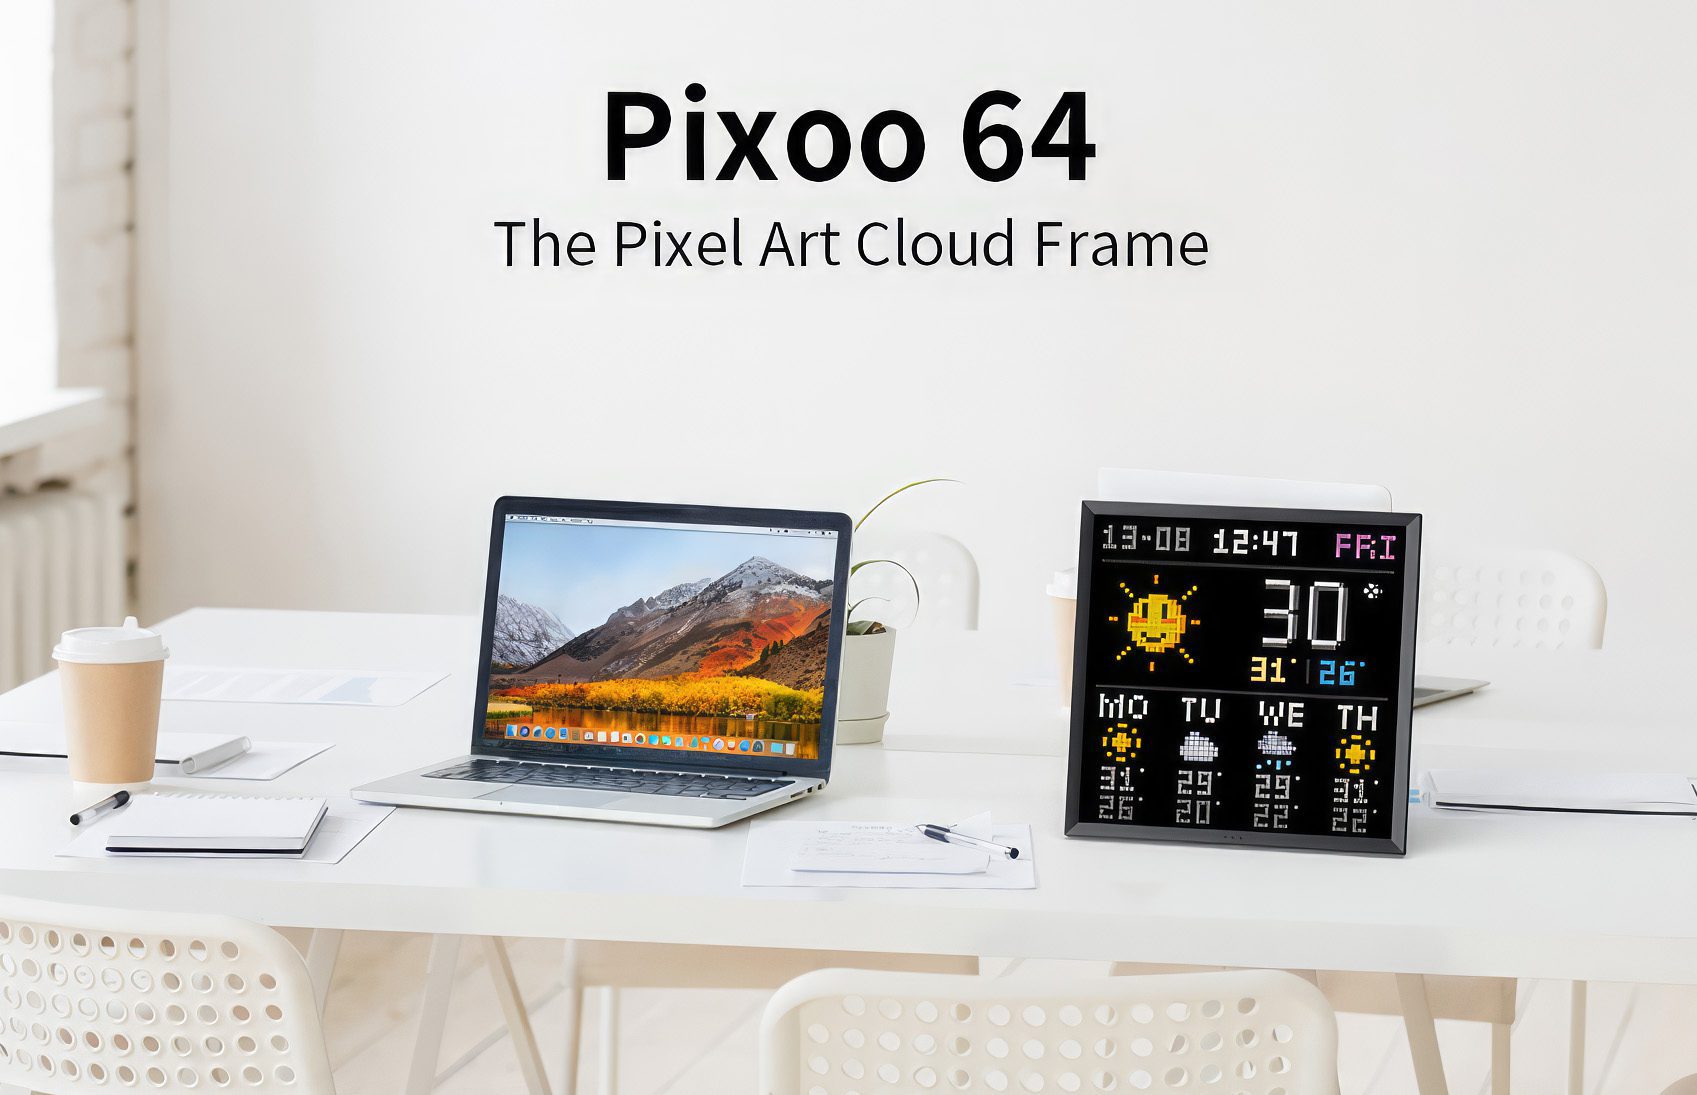 With 64 pixels, the Pixoo 4096 LED matrix offers a fairly high resolution and can also display information or pixel art (Photo: Divoom).